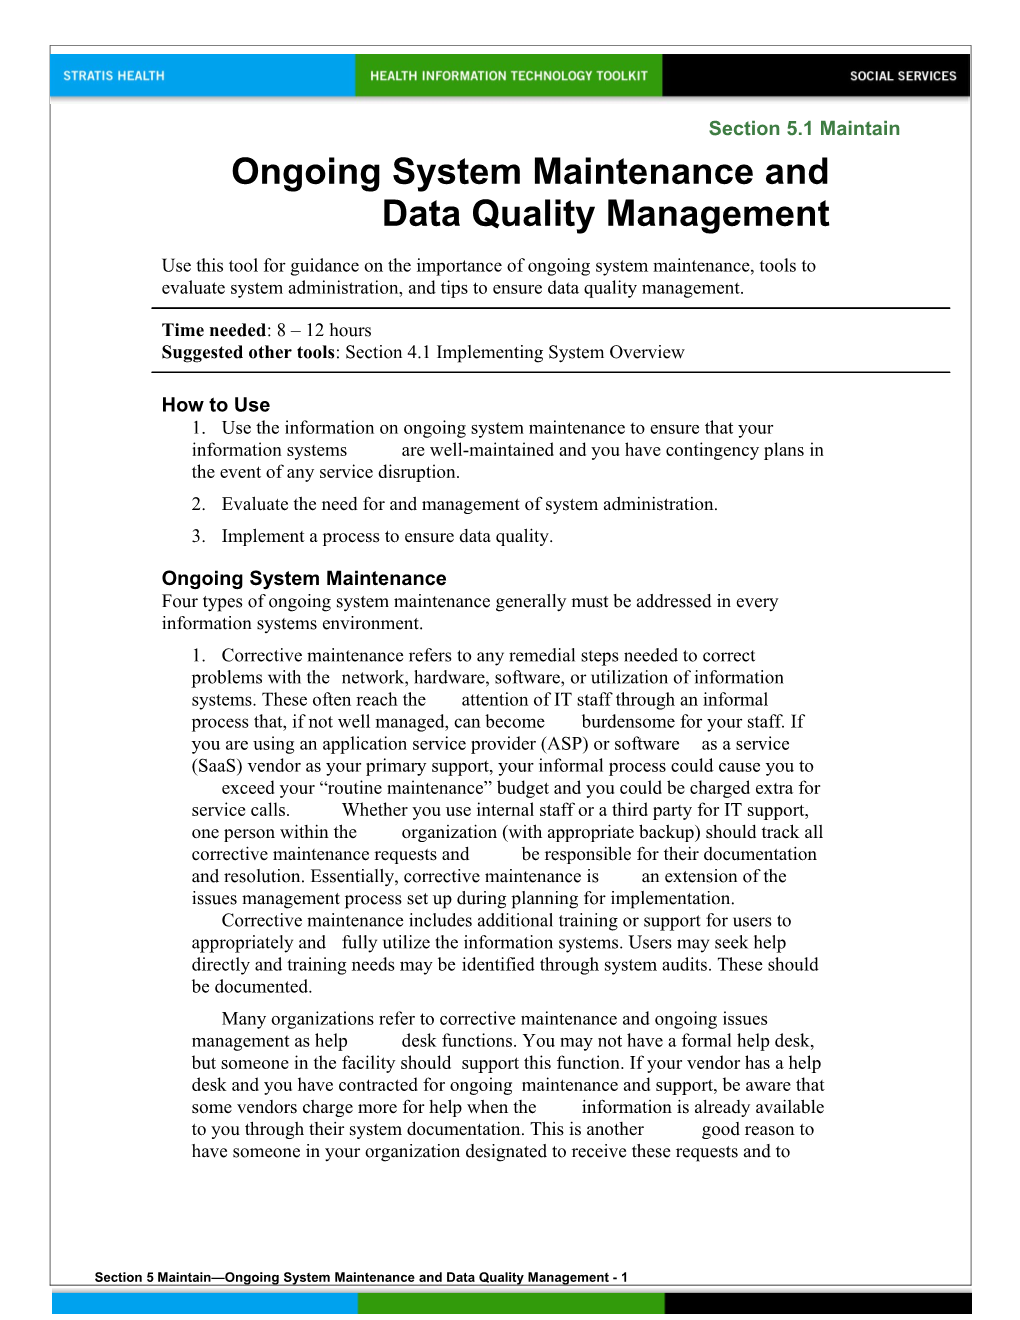 5 Ongoing System Maintenance and Data Quality Management